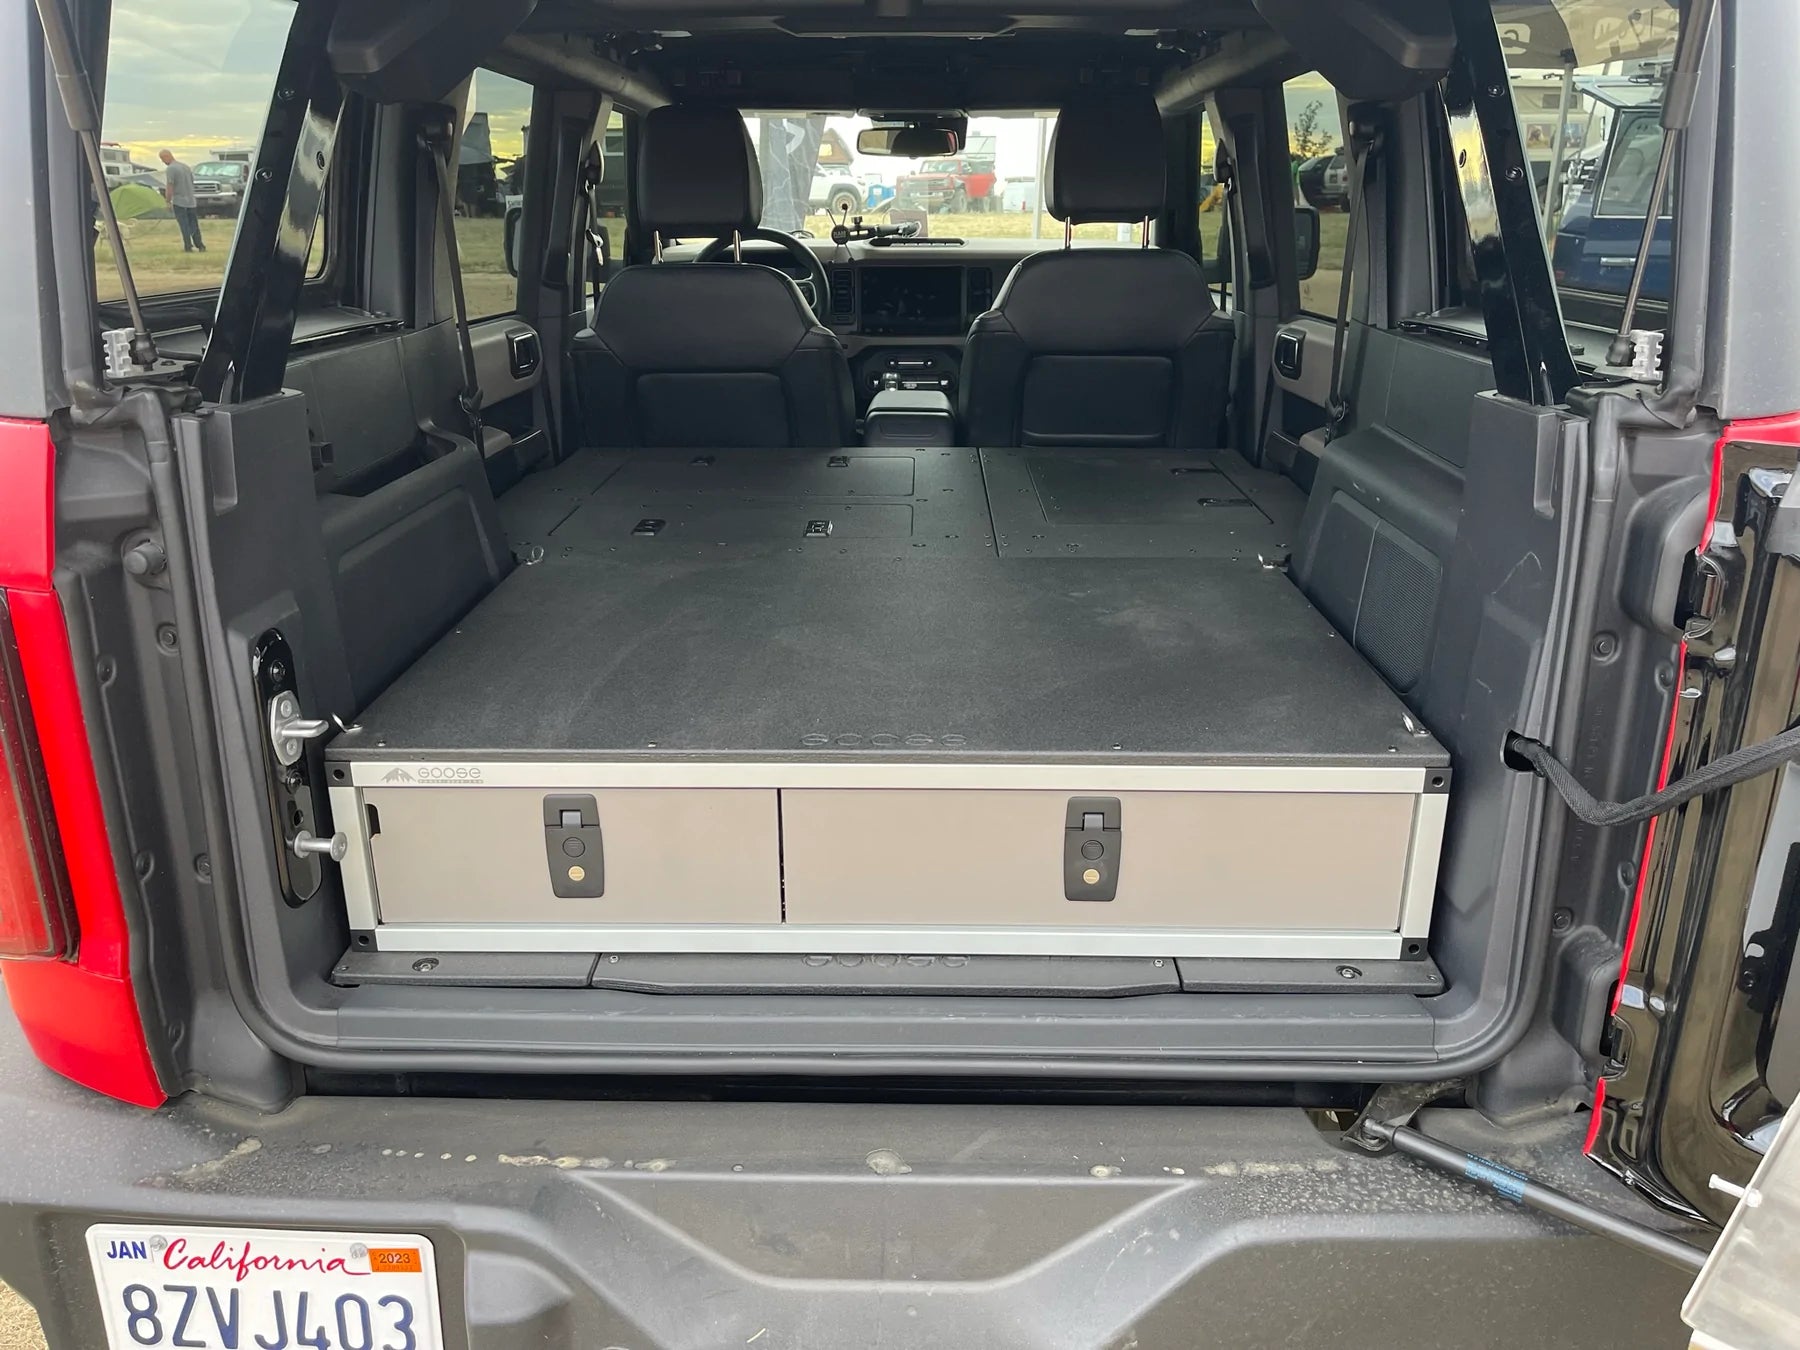 Stealth Sleep and Storage Package For Ford Bronco - 2021-Present 6th Gen 4 Door